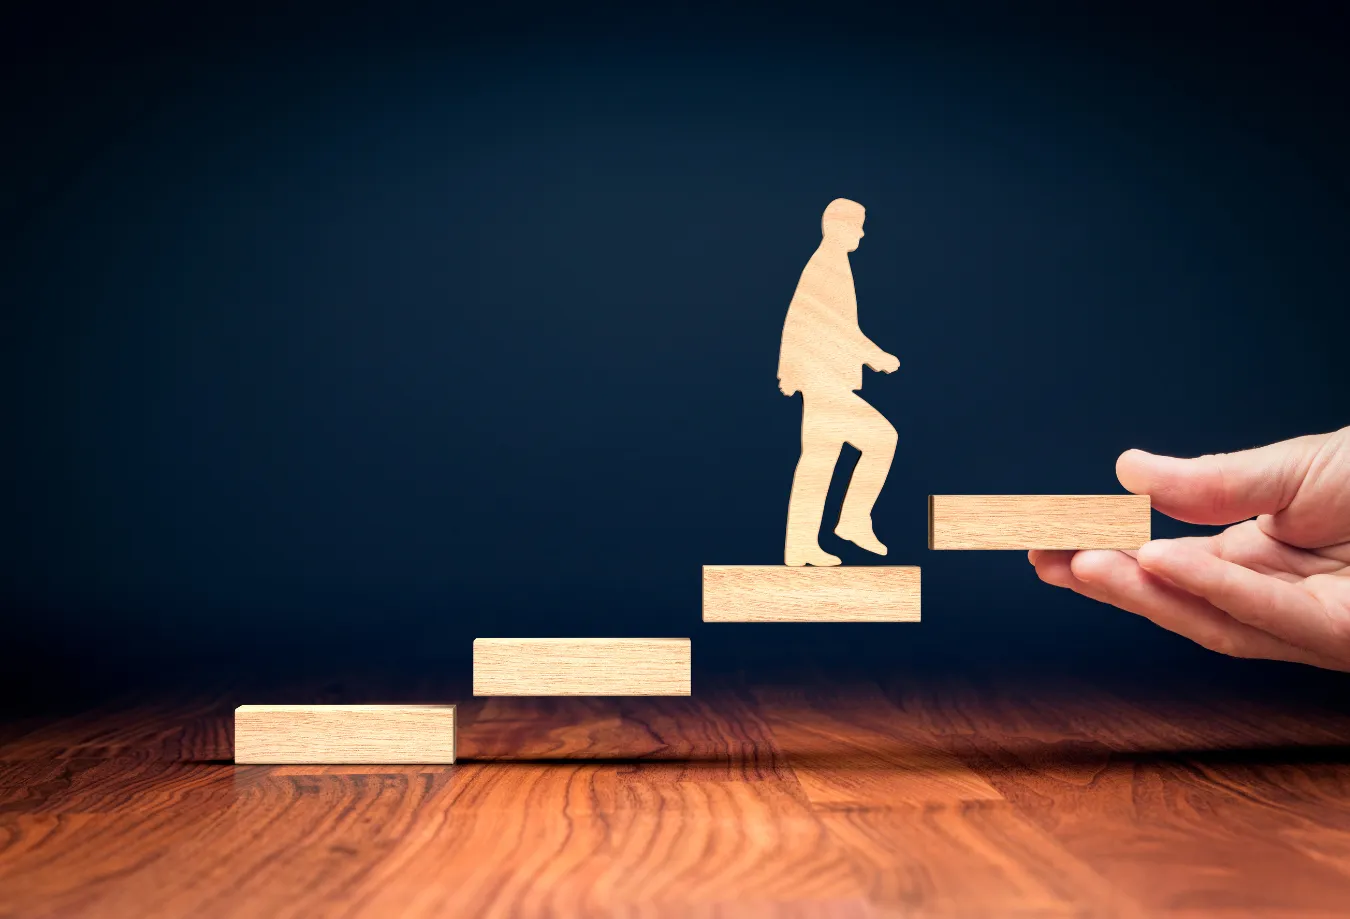 Image: A side-view of a human hand showing a human-like figurine climbing stairs, showing the importance of leadership development in workplace